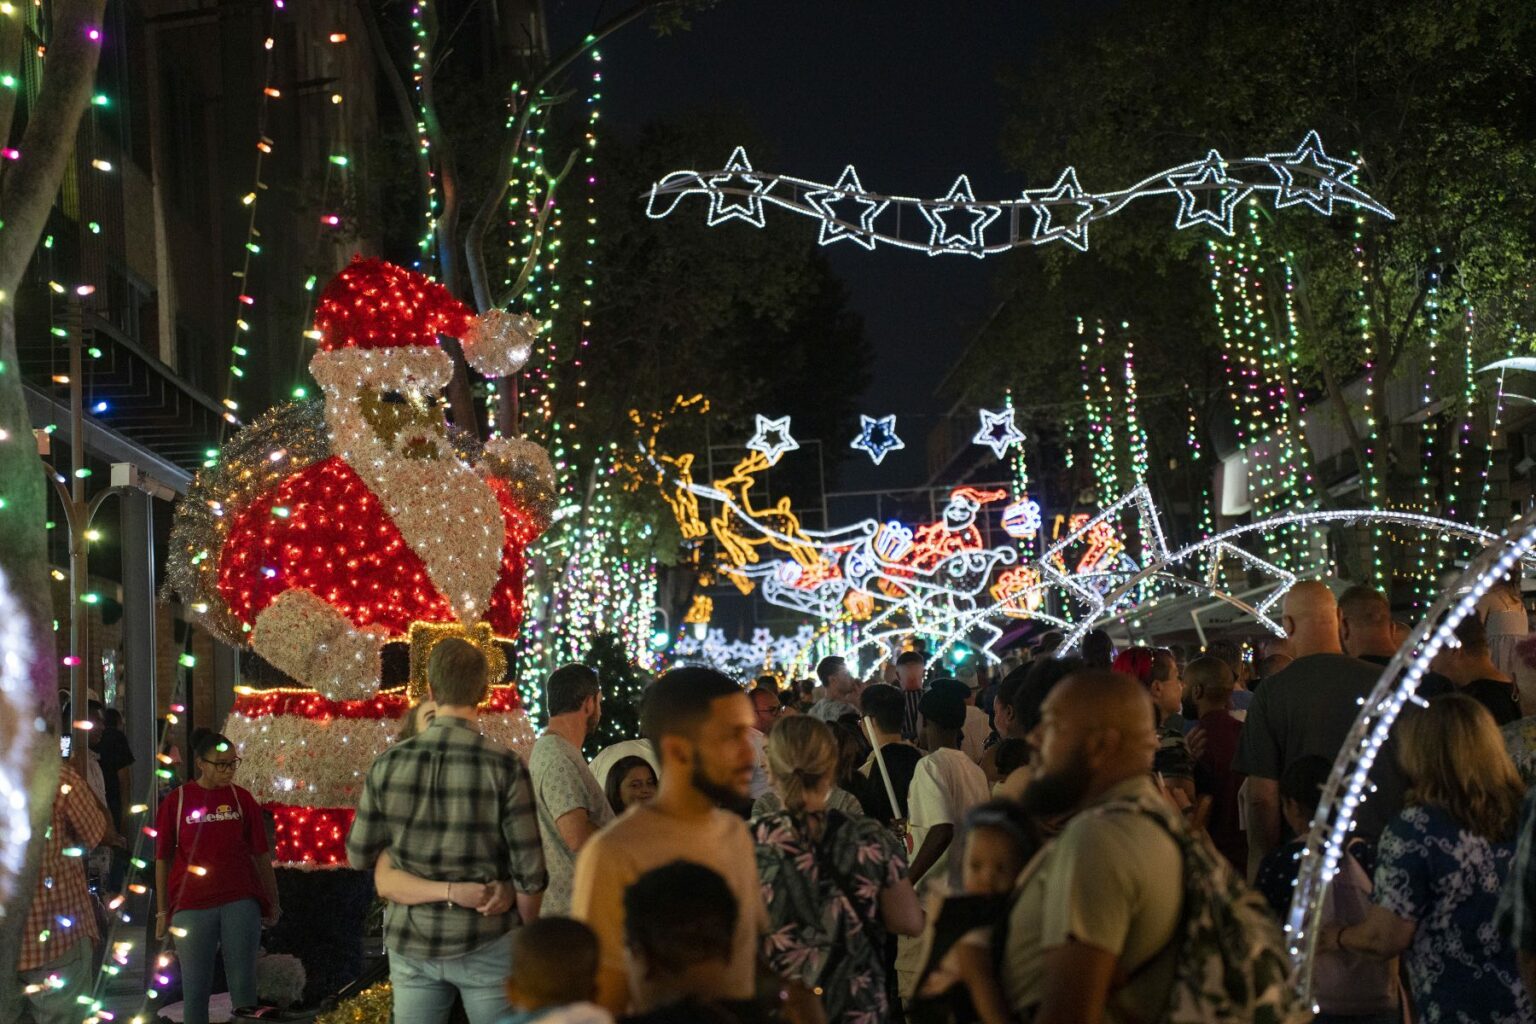 Christmas decoration illuminate a busy street in Johannesburg, with a light up Santa Claus